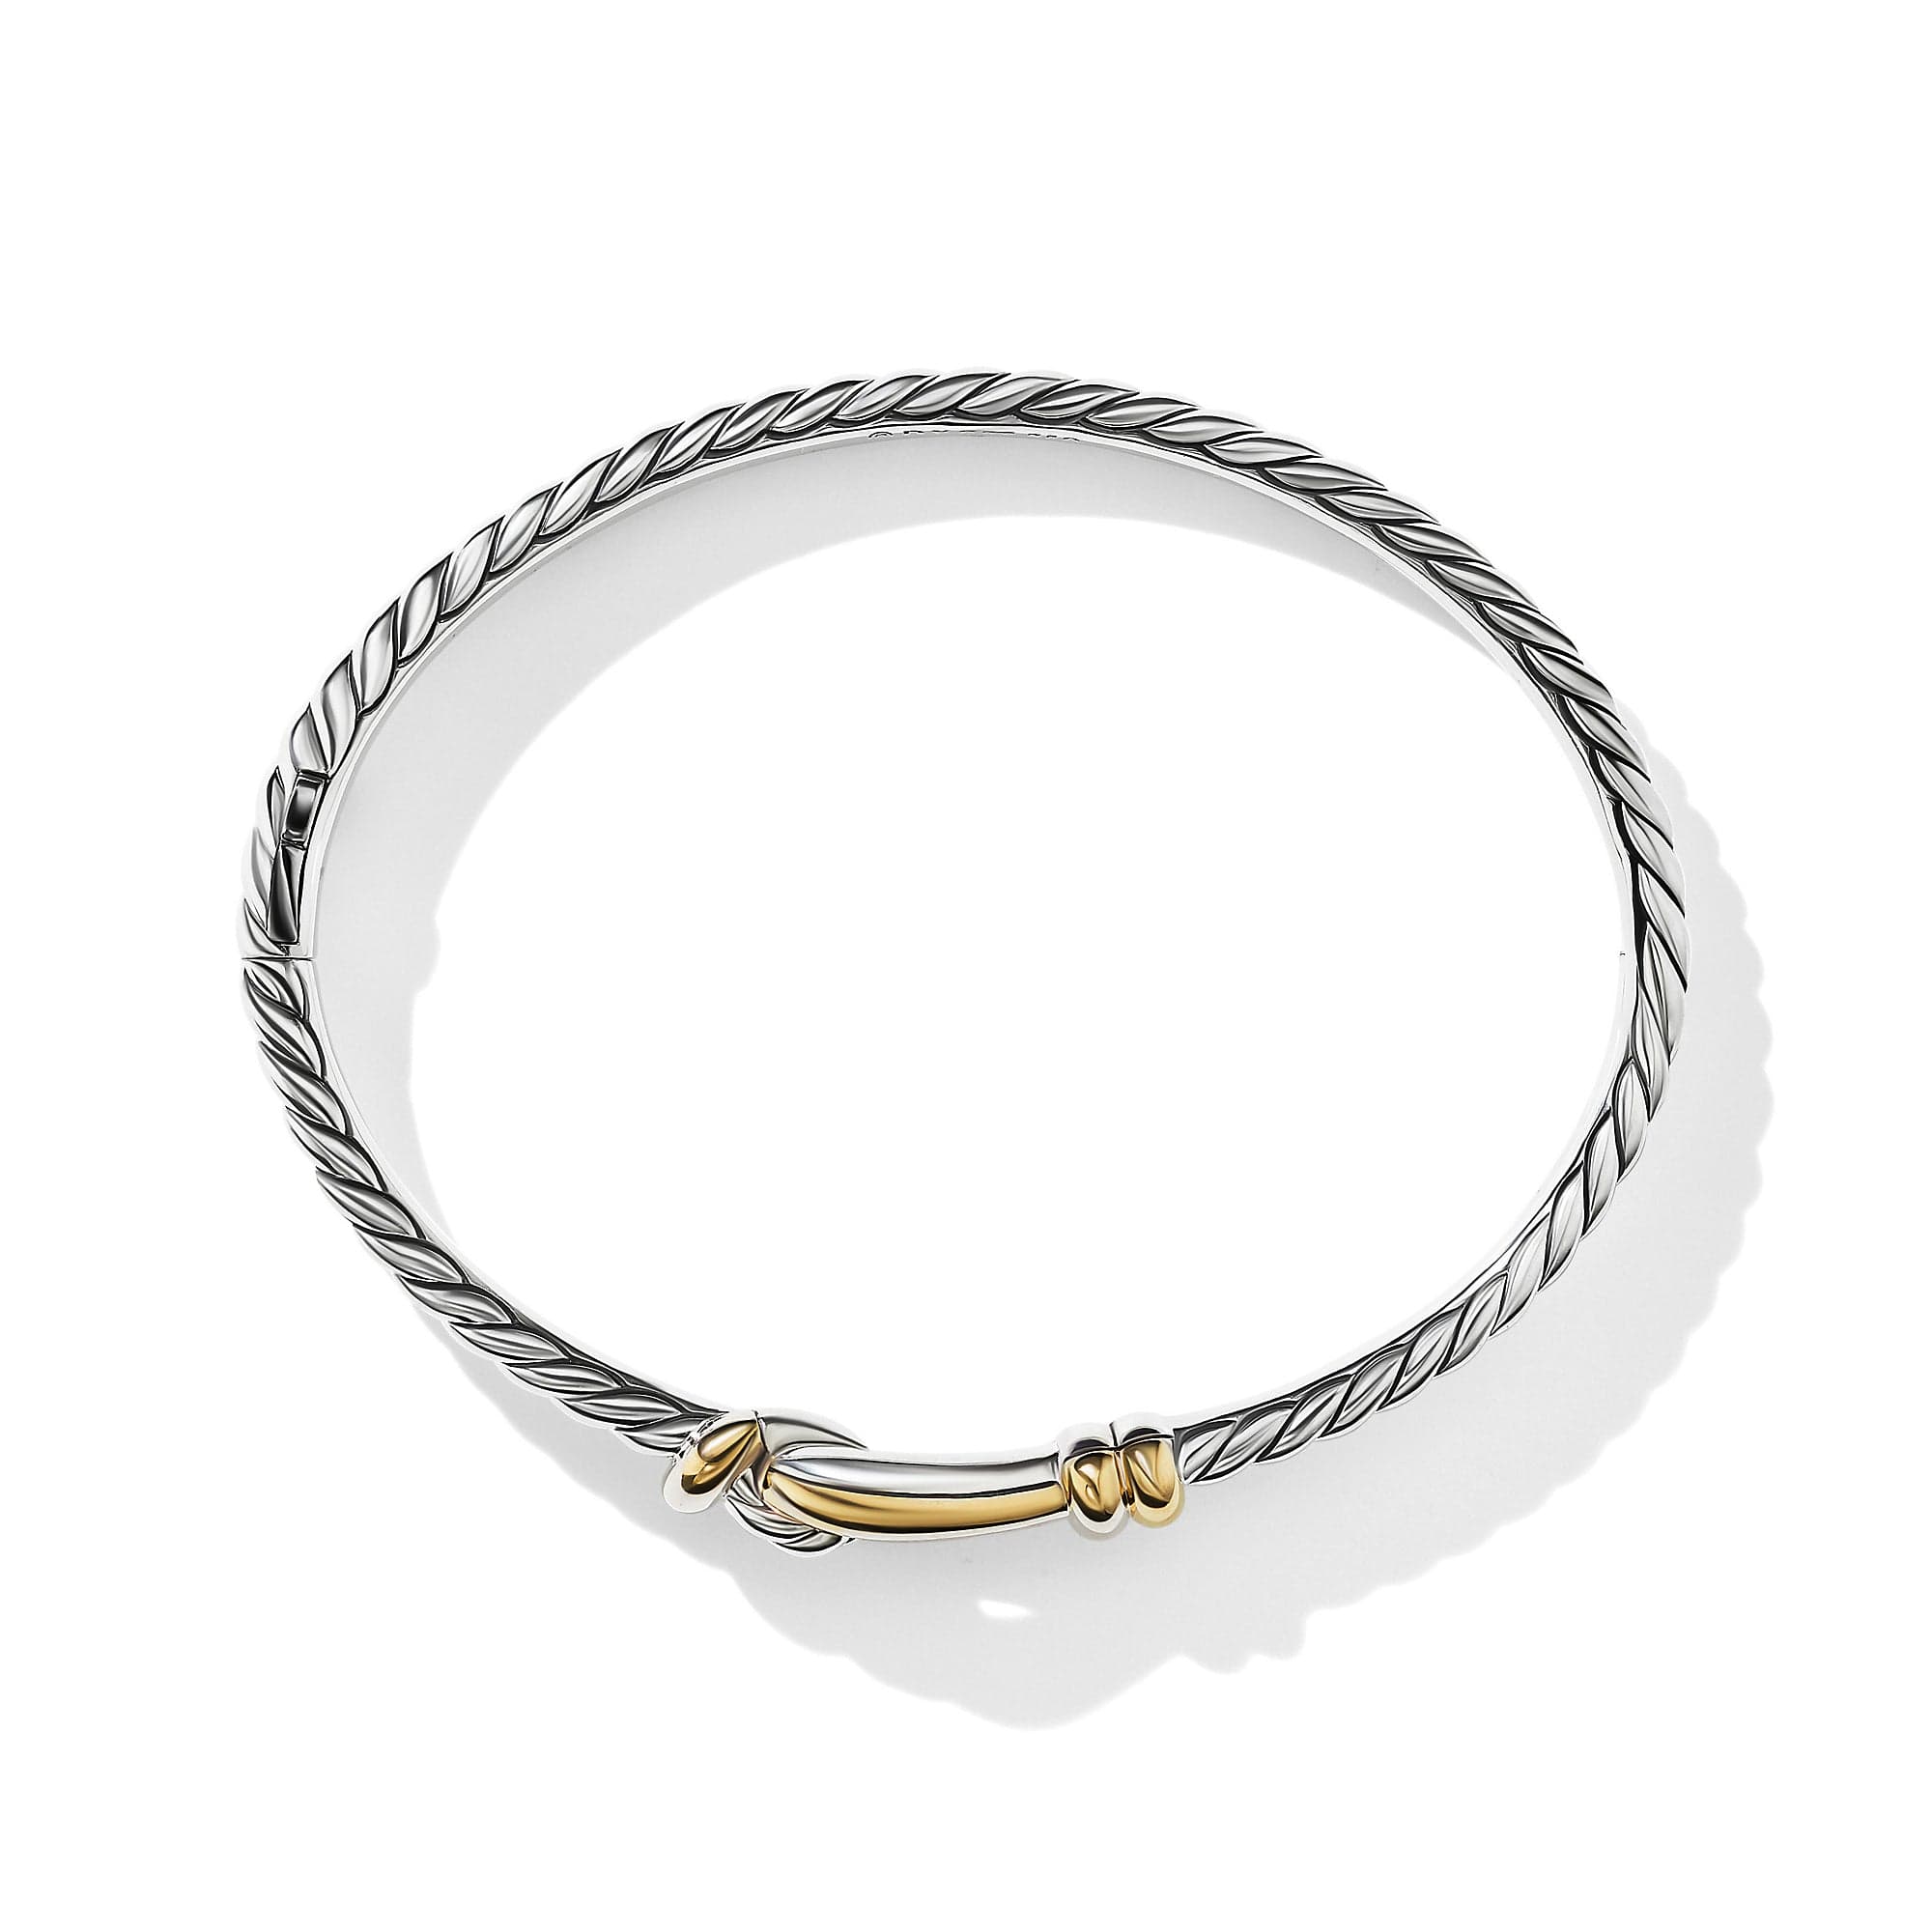 Thoroughbred Loop Bracelet with 18K Yellow Gold, Long's Jewelers